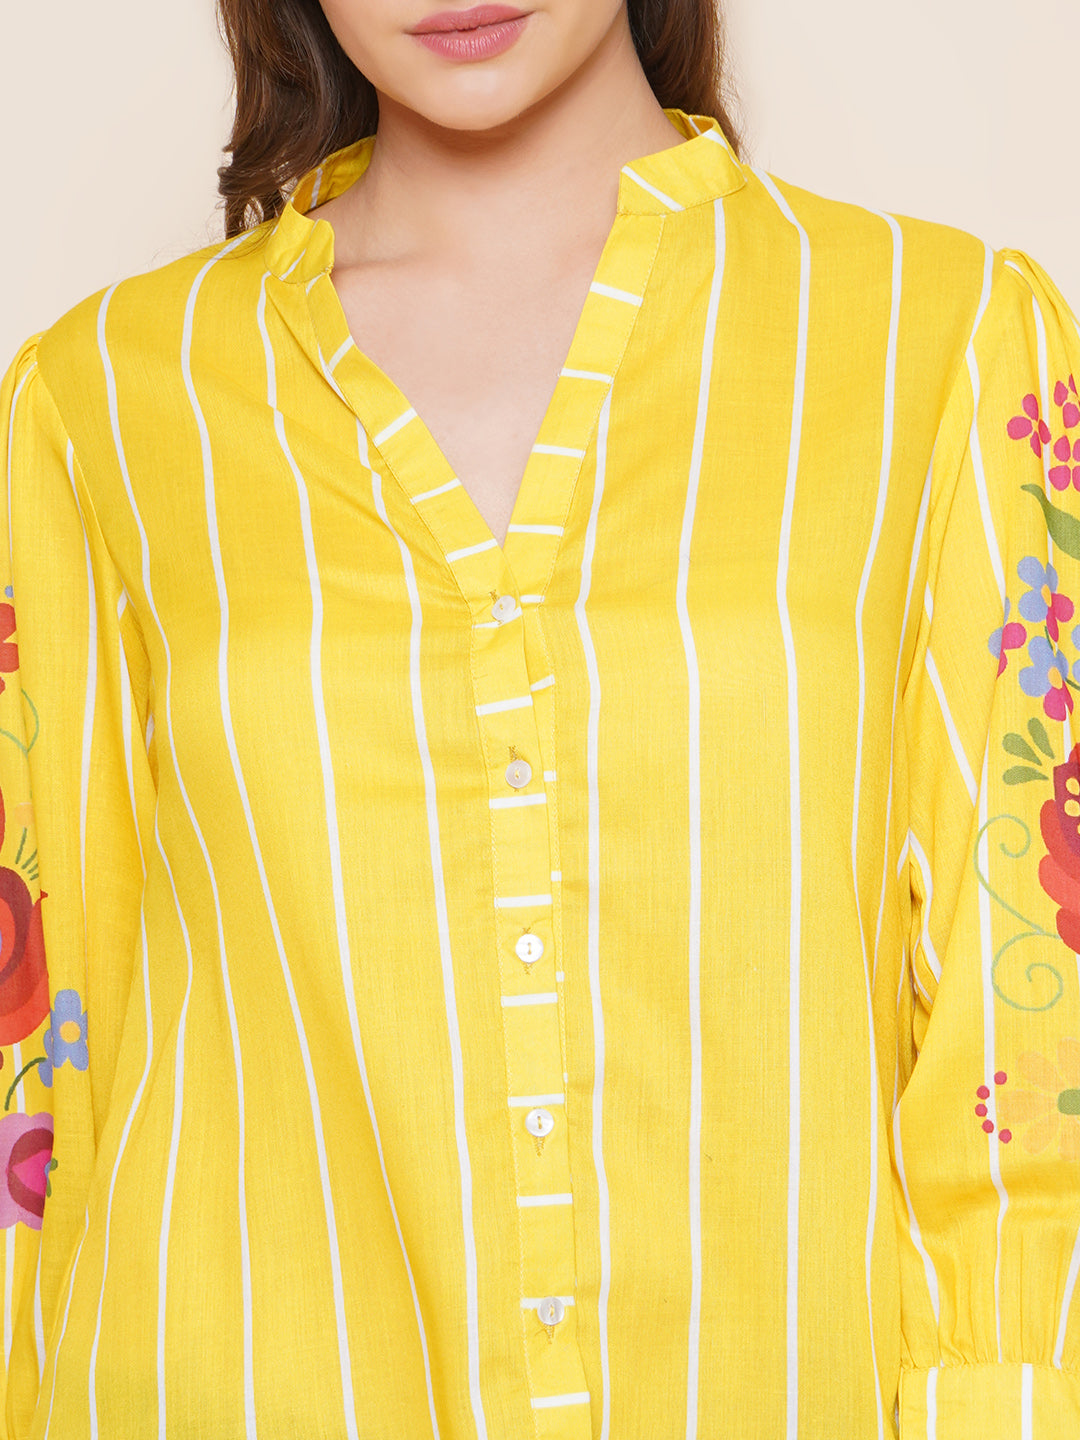 Bhama Couture Yellow Printed Shirt Style Top